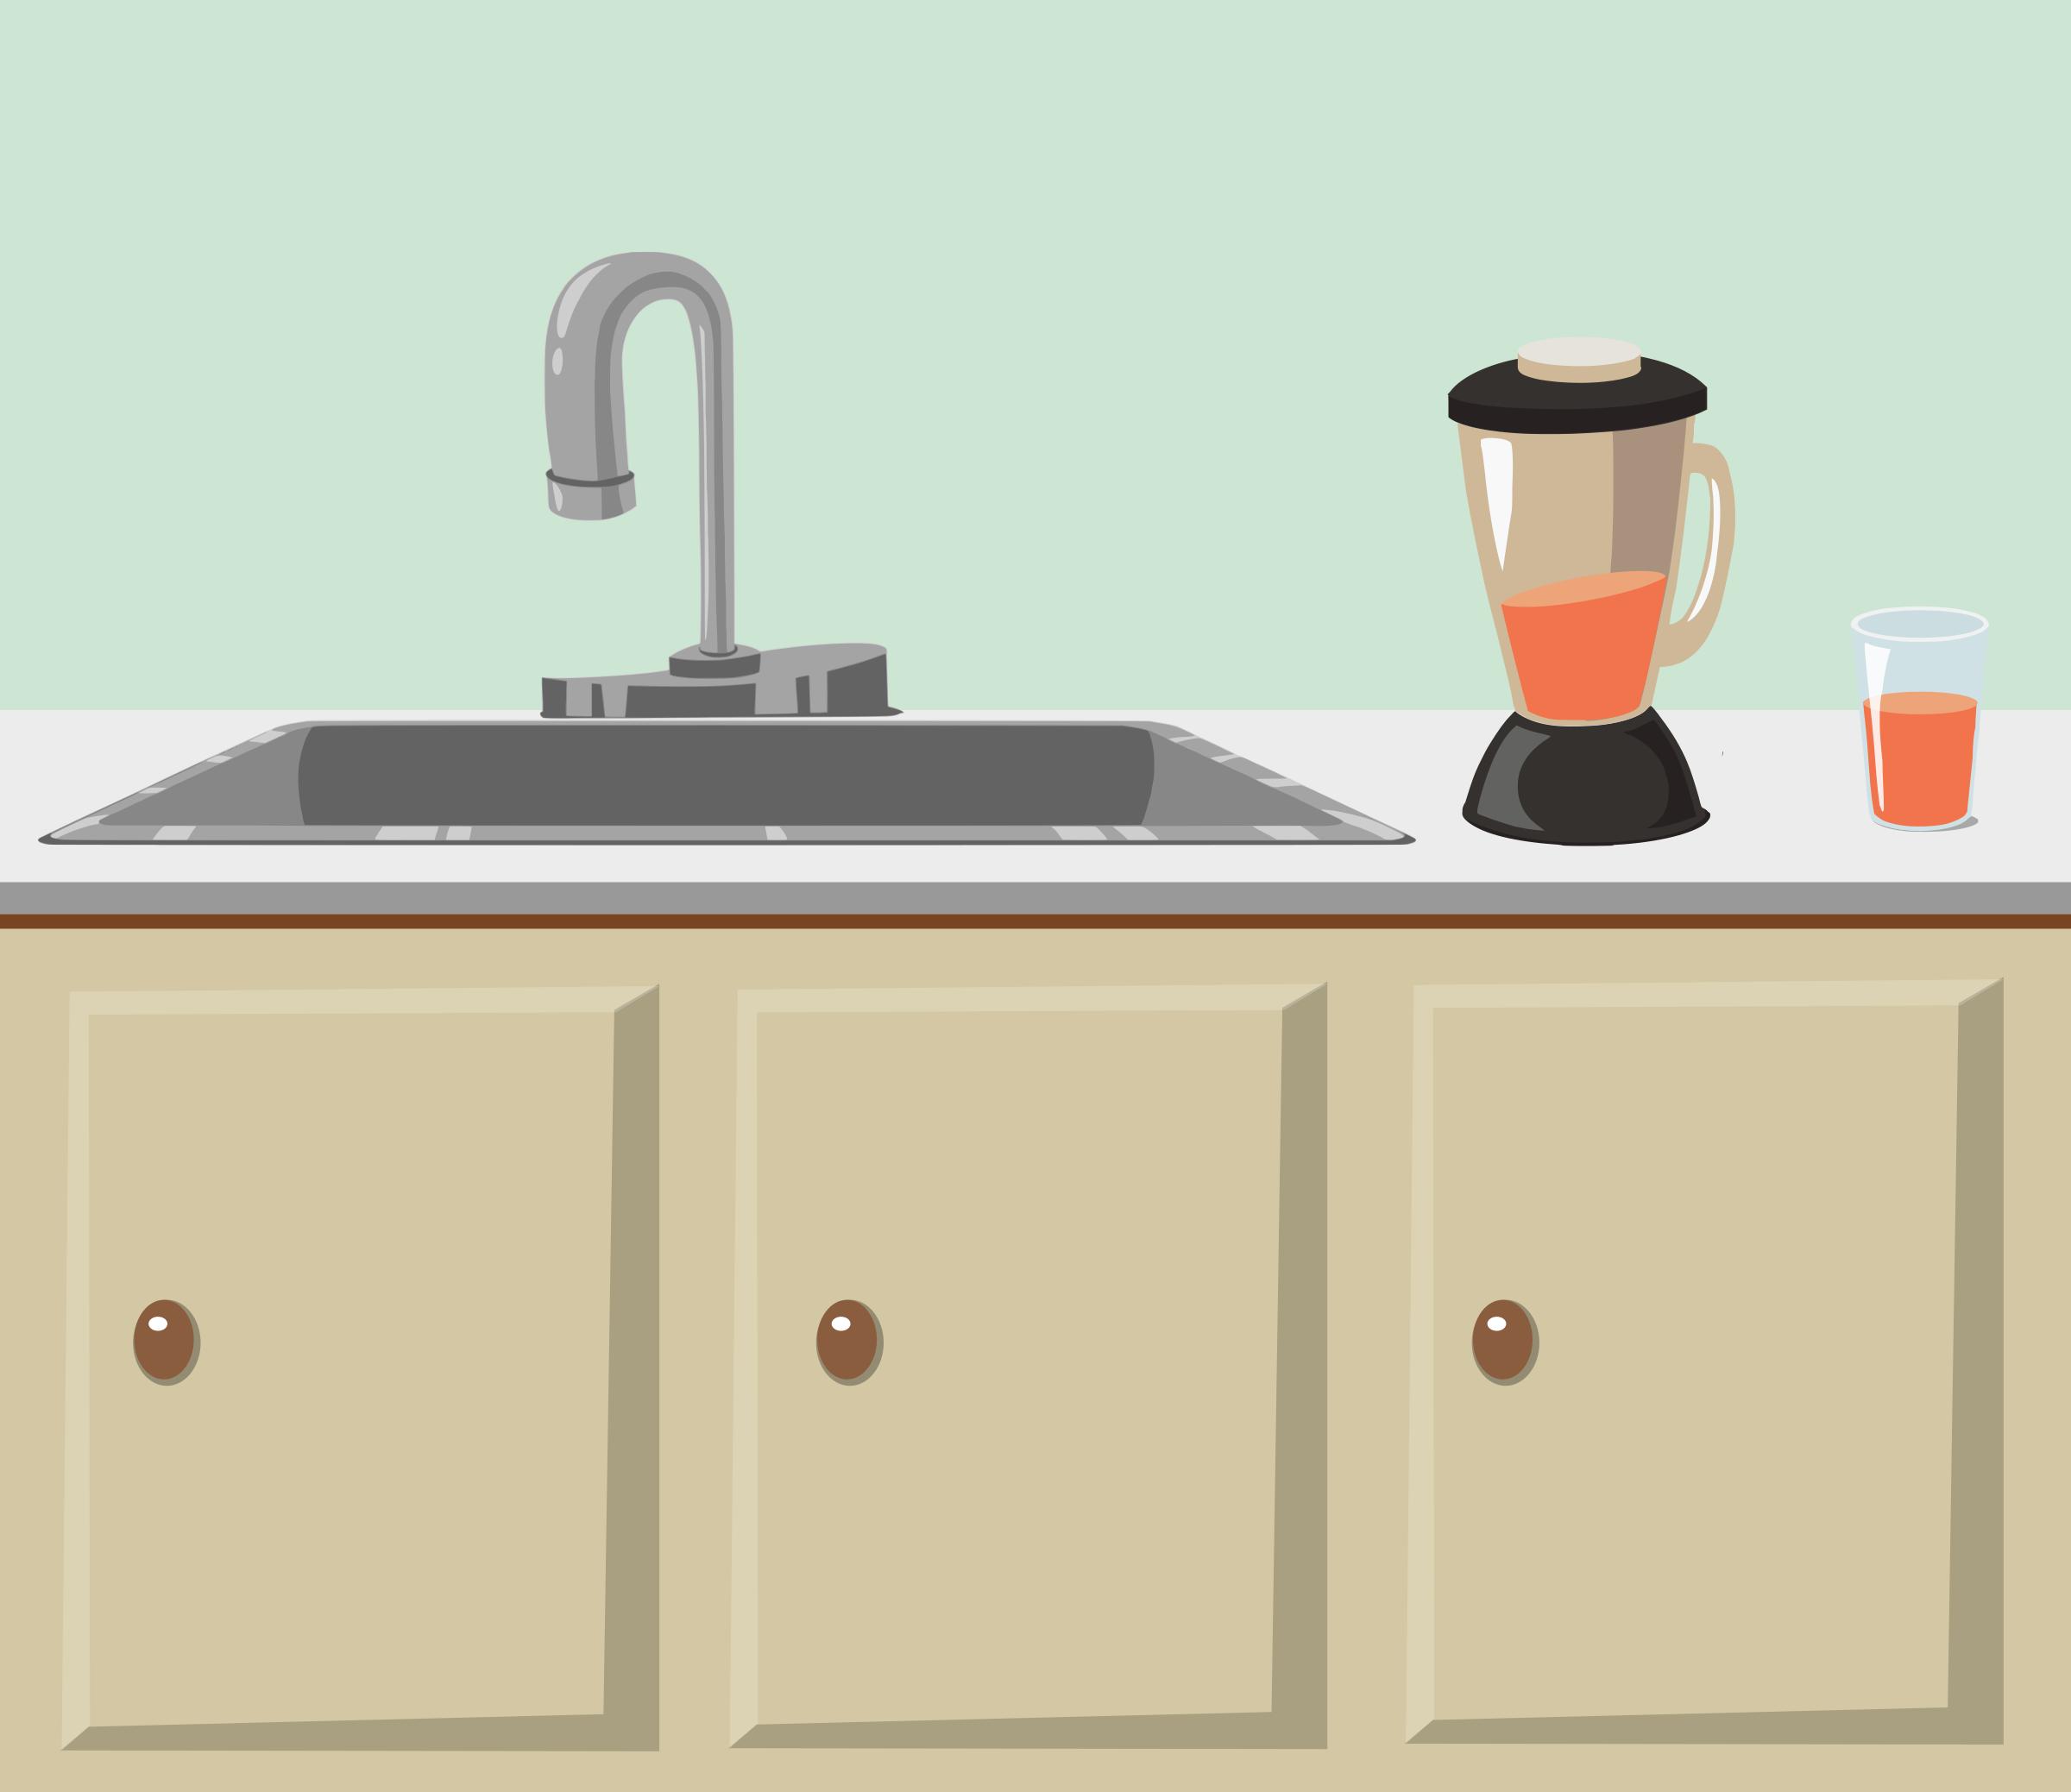 Kitchen counter and sink from Glitch png